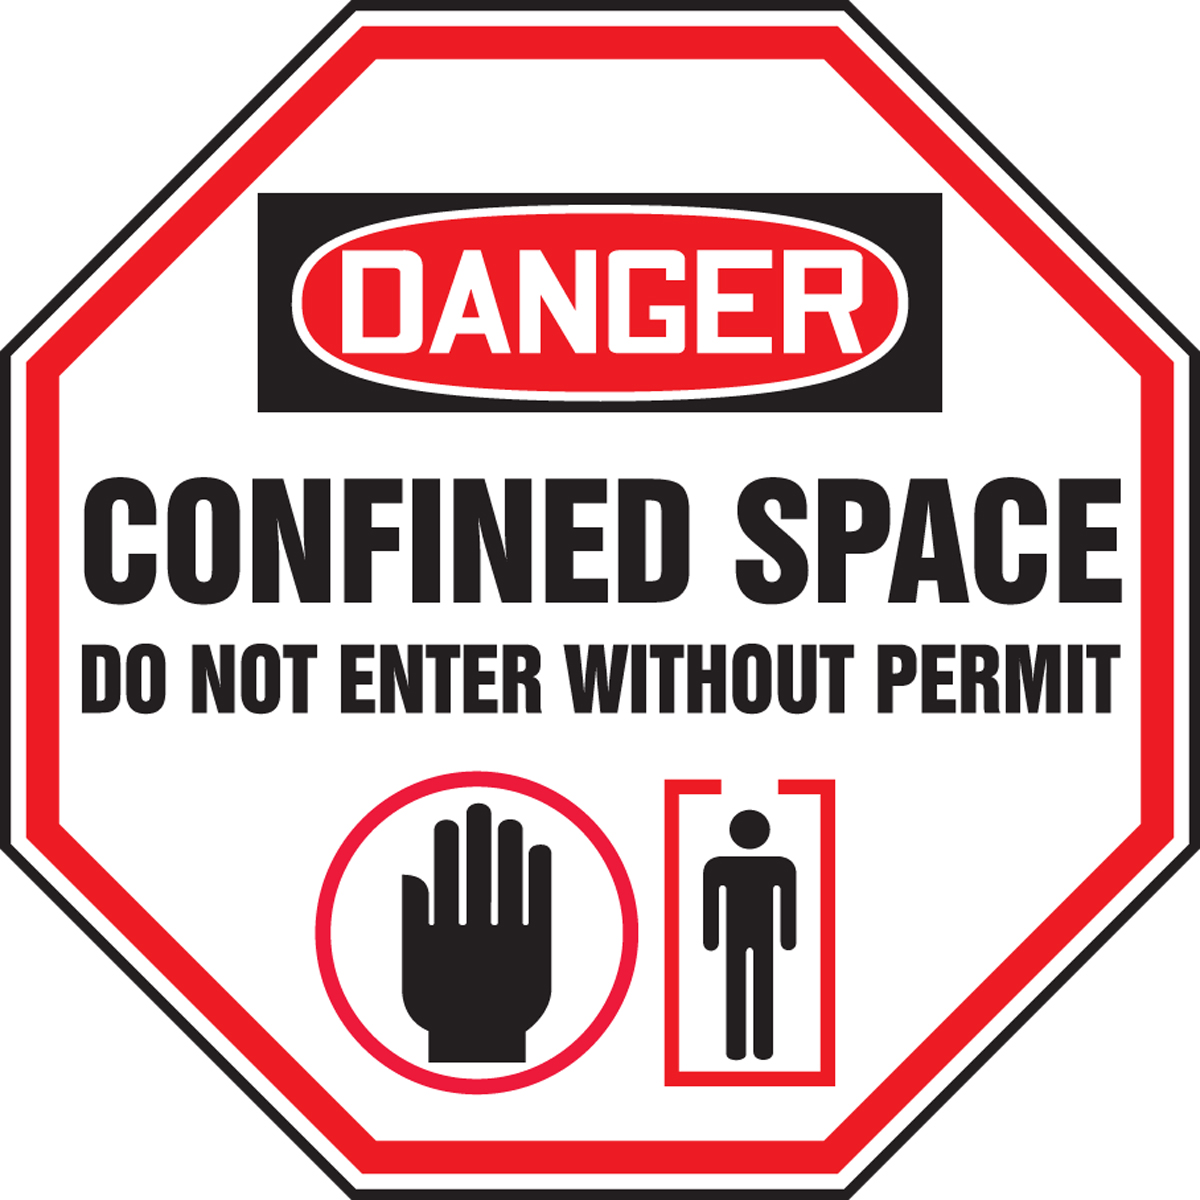 DANGER CONFINED SPACE DO NOT ENTER WITHOUT PERMIT (W/GRAPHIC)